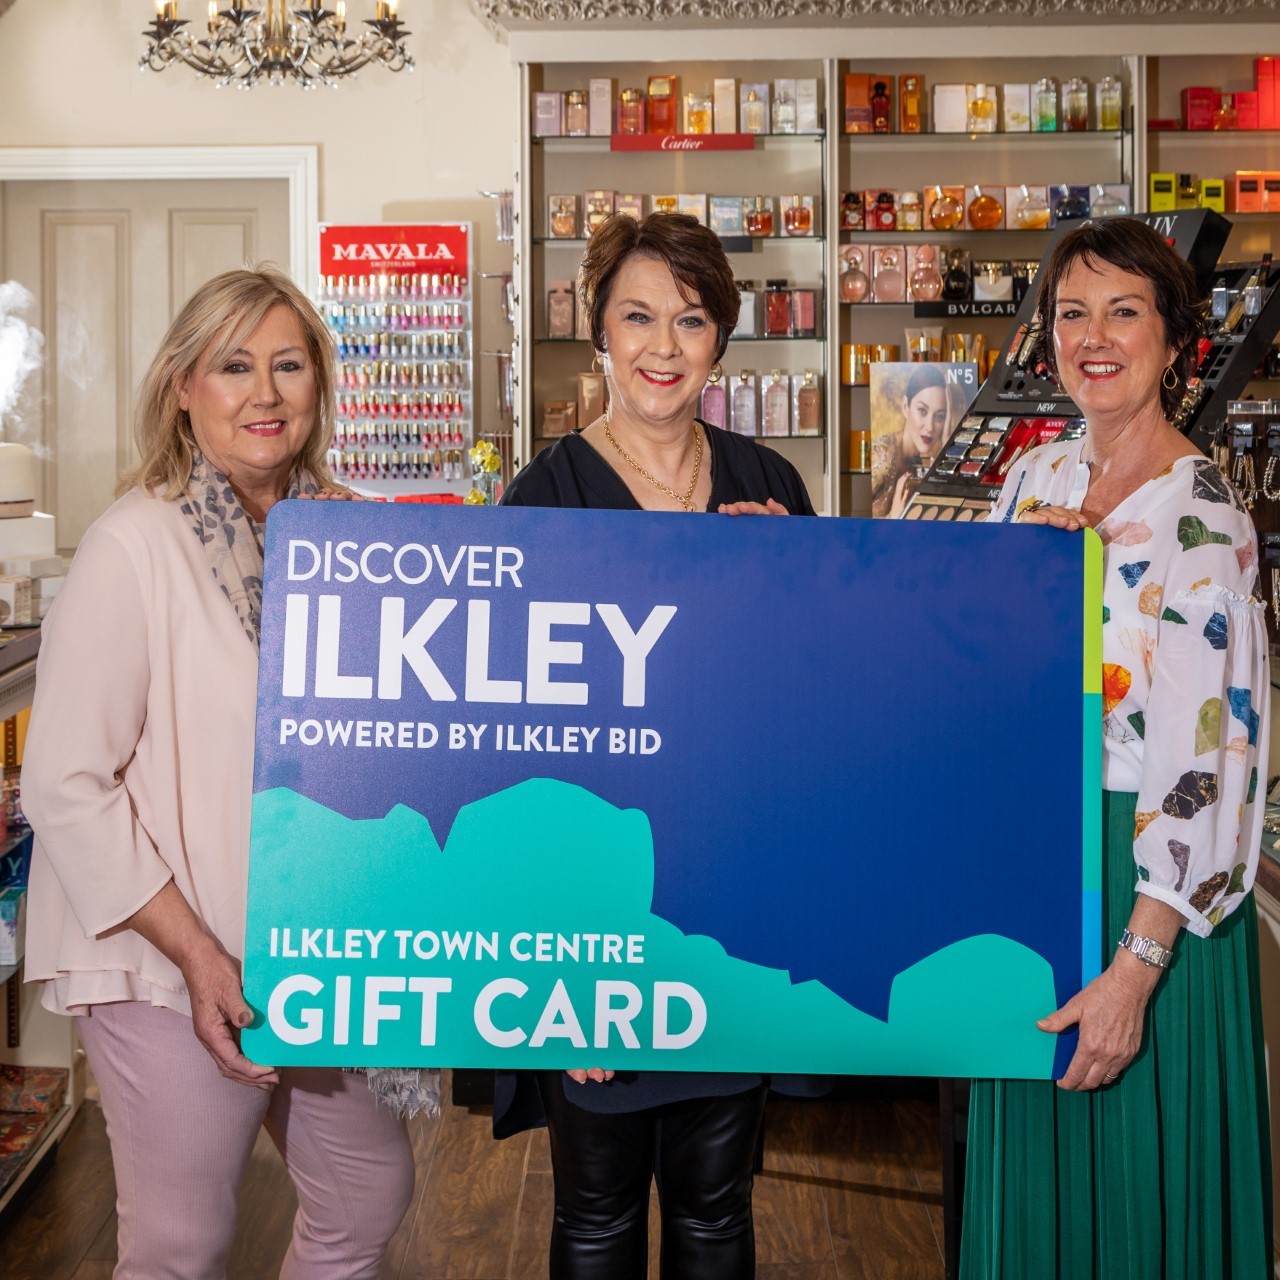 Ilkley leads the way in the digital high street revolution with the launch of its new gift card